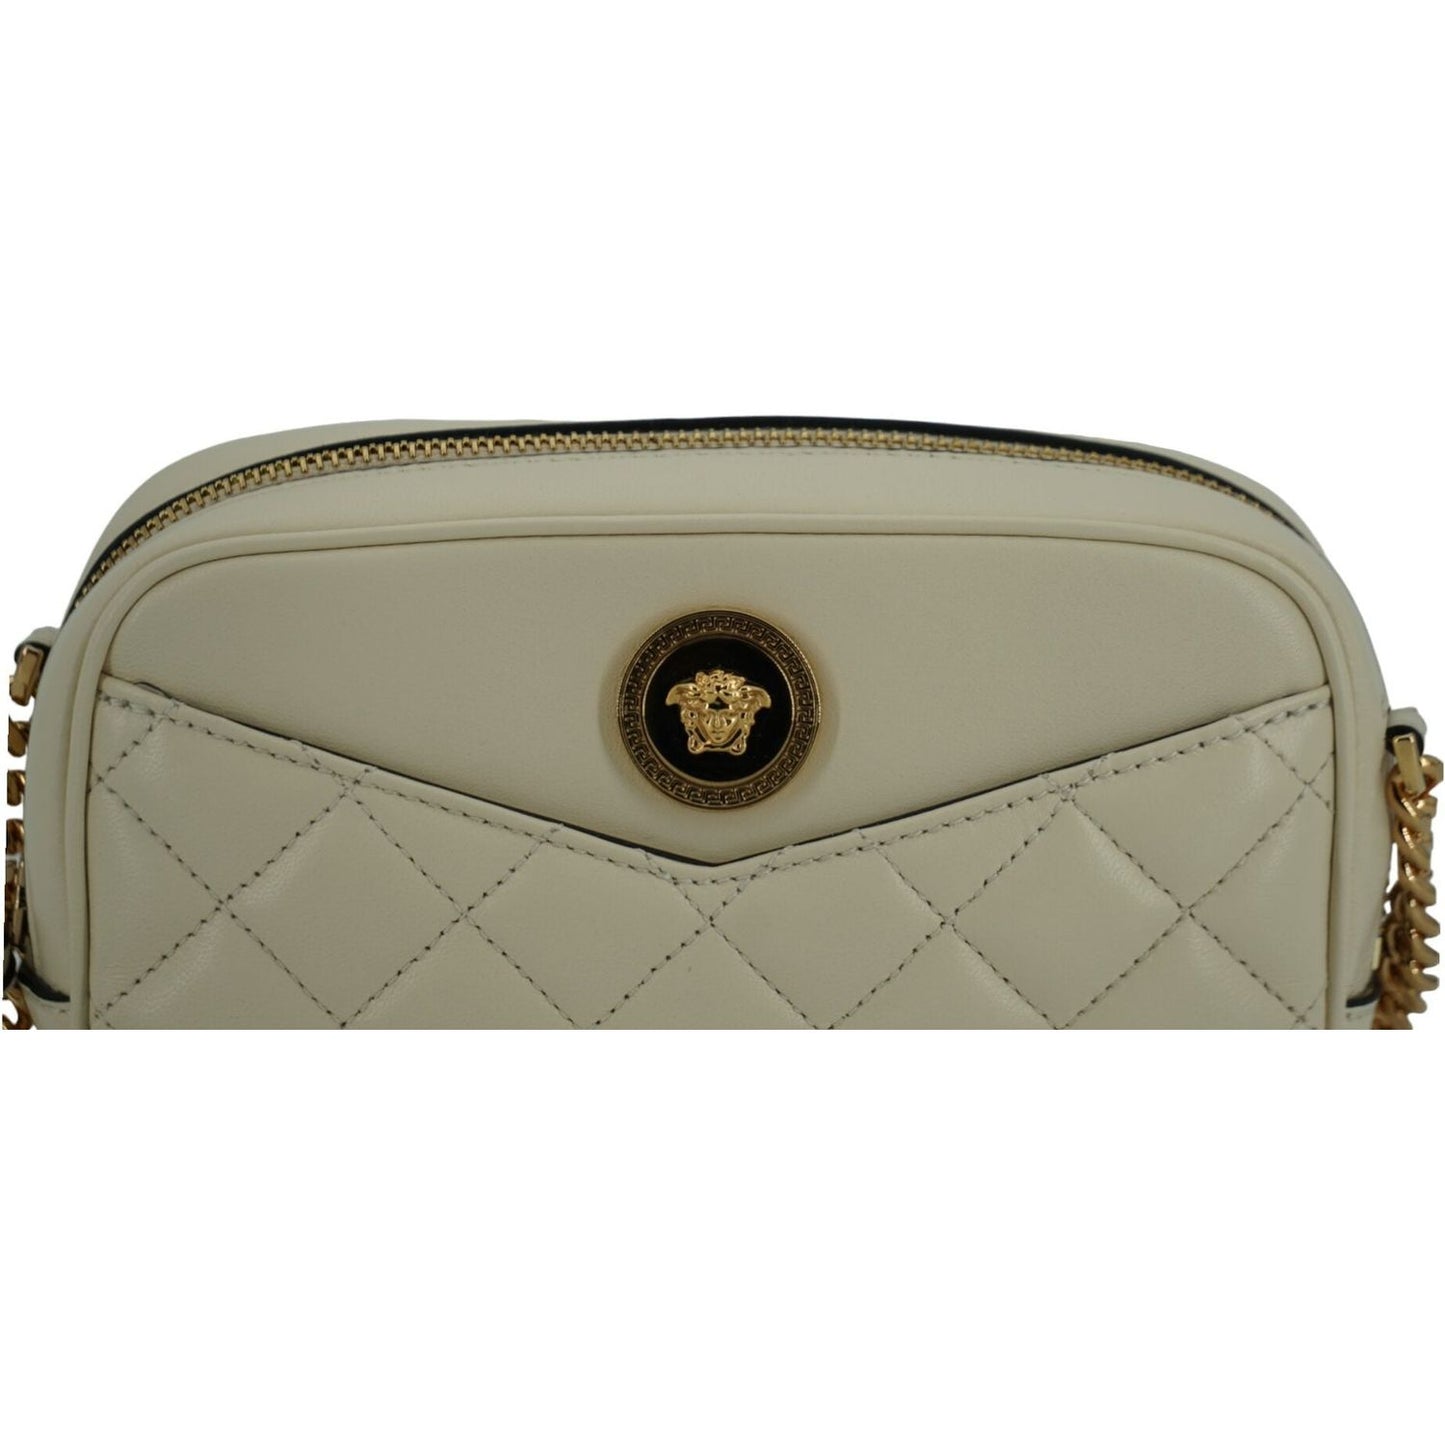 Versace White Lamb Leather Small Camera Crossbody Bag white-lamb-leather-small-camera-crossbody-bag DSC01200-scaled-aa674f6c-d14.jpg